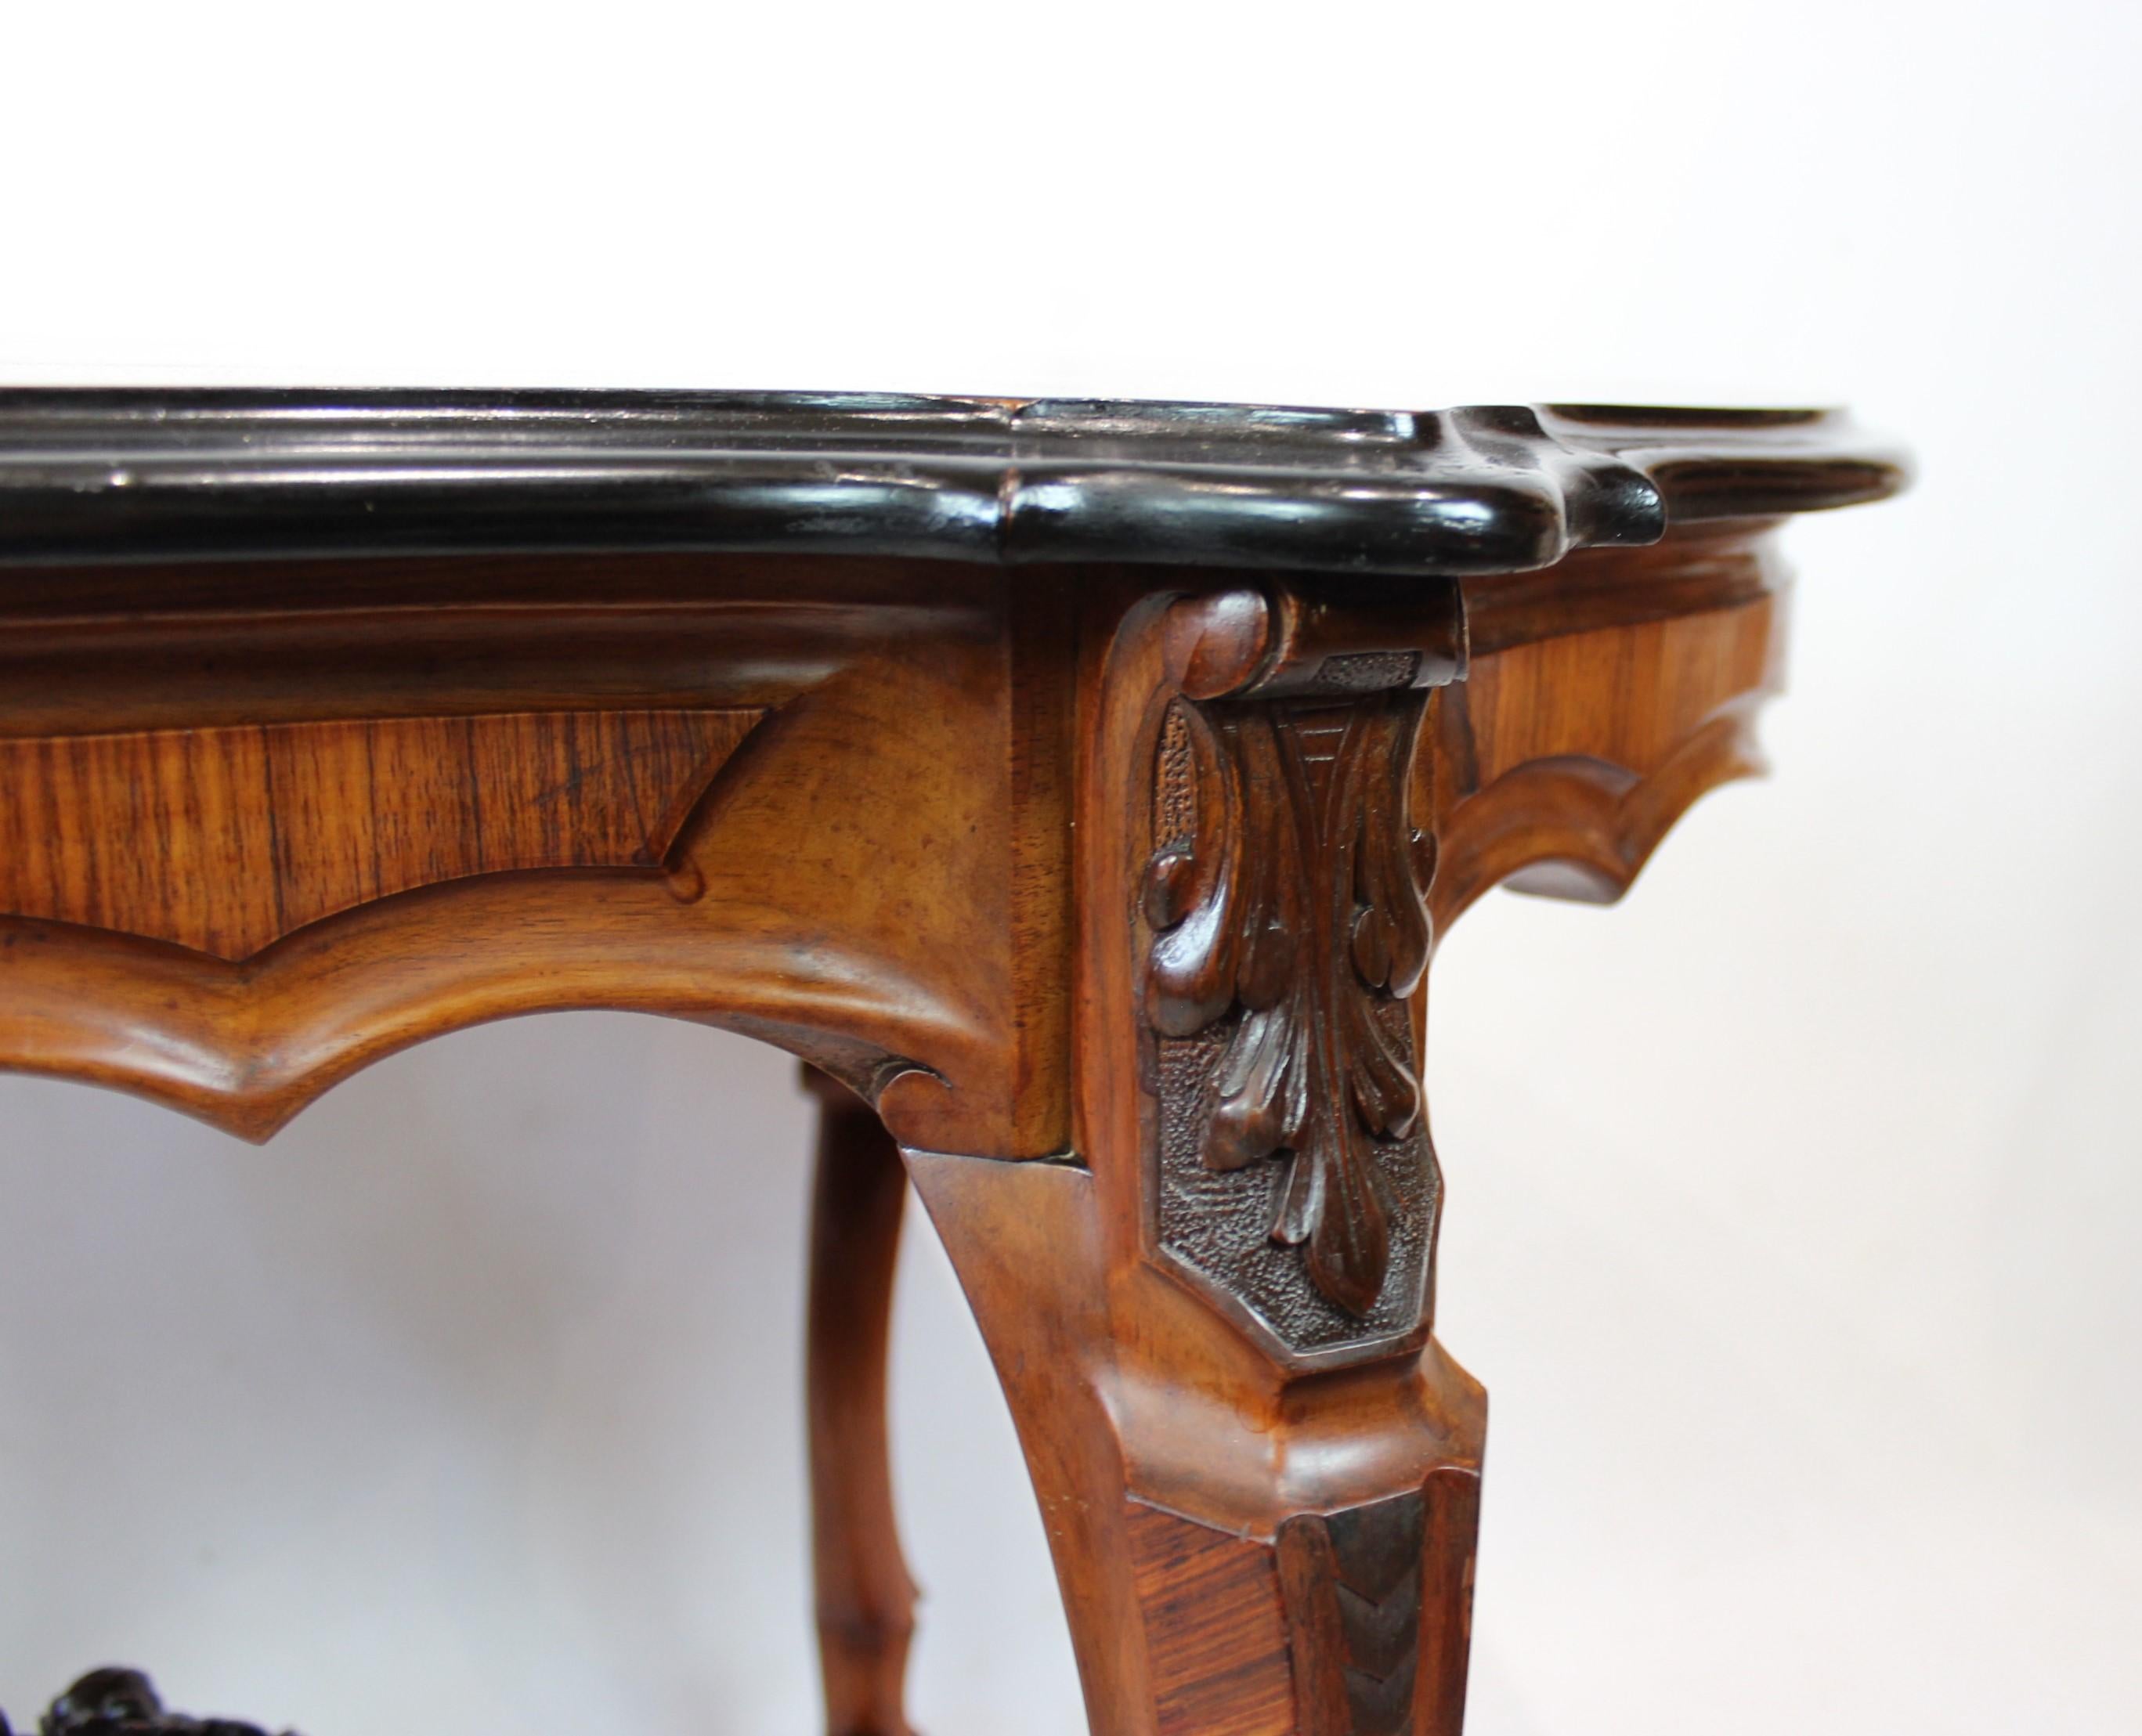 Danish New Rococo Pedestal Table of Walnut with Carvings and Inlaid Intarsia, 1880s